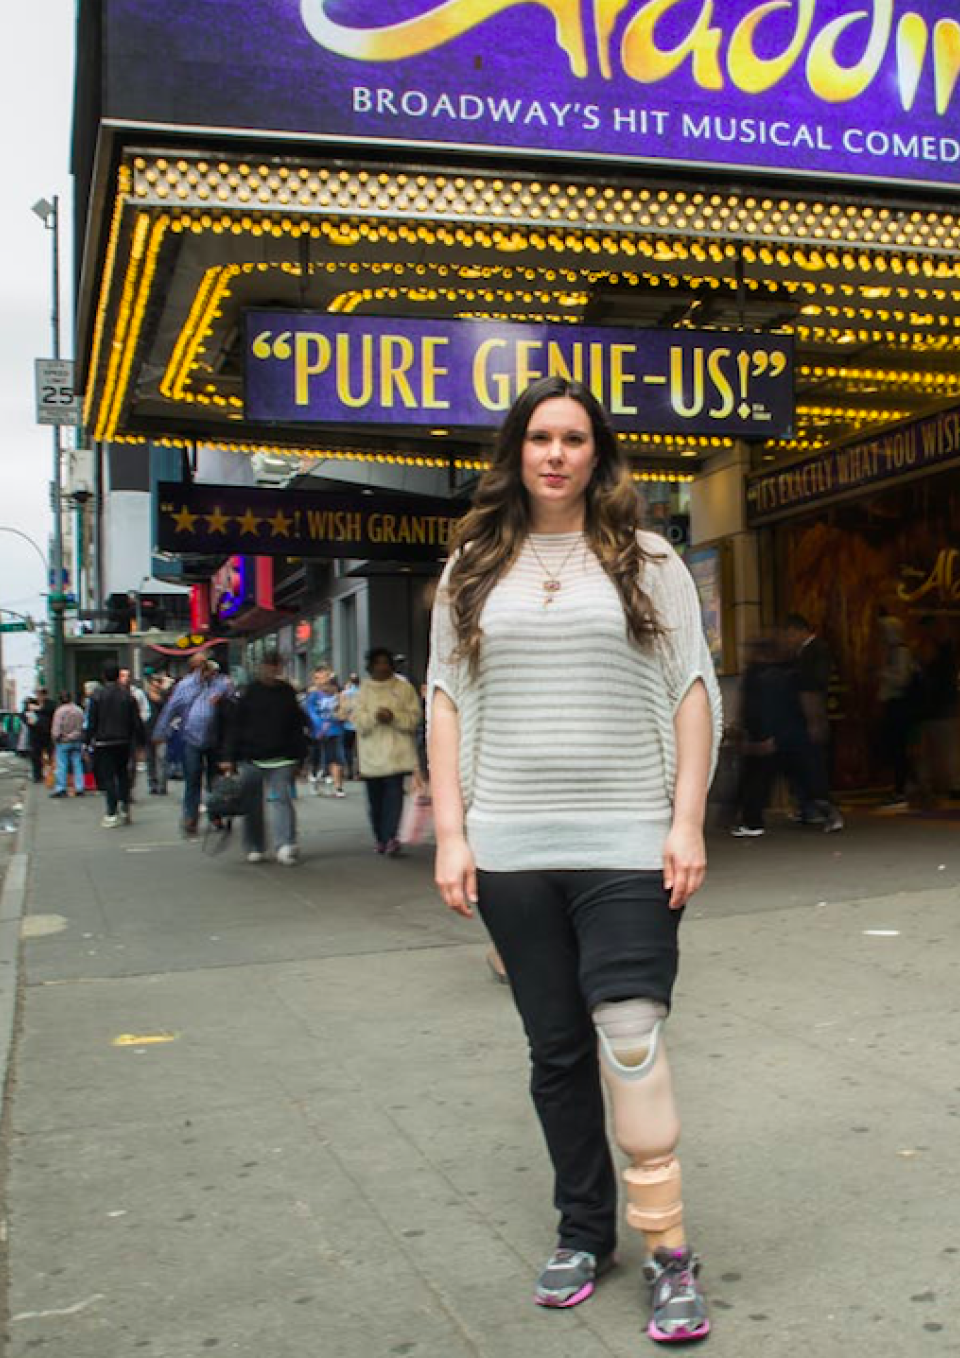 A white woman with long brown hair, a striped white and beige top, black pants and running shoes, standing on a city sidewalk in front of the awning for the theatrical production of Aladdin. She has her left pant leg hiked up to display her above-knee prosthetic leg.